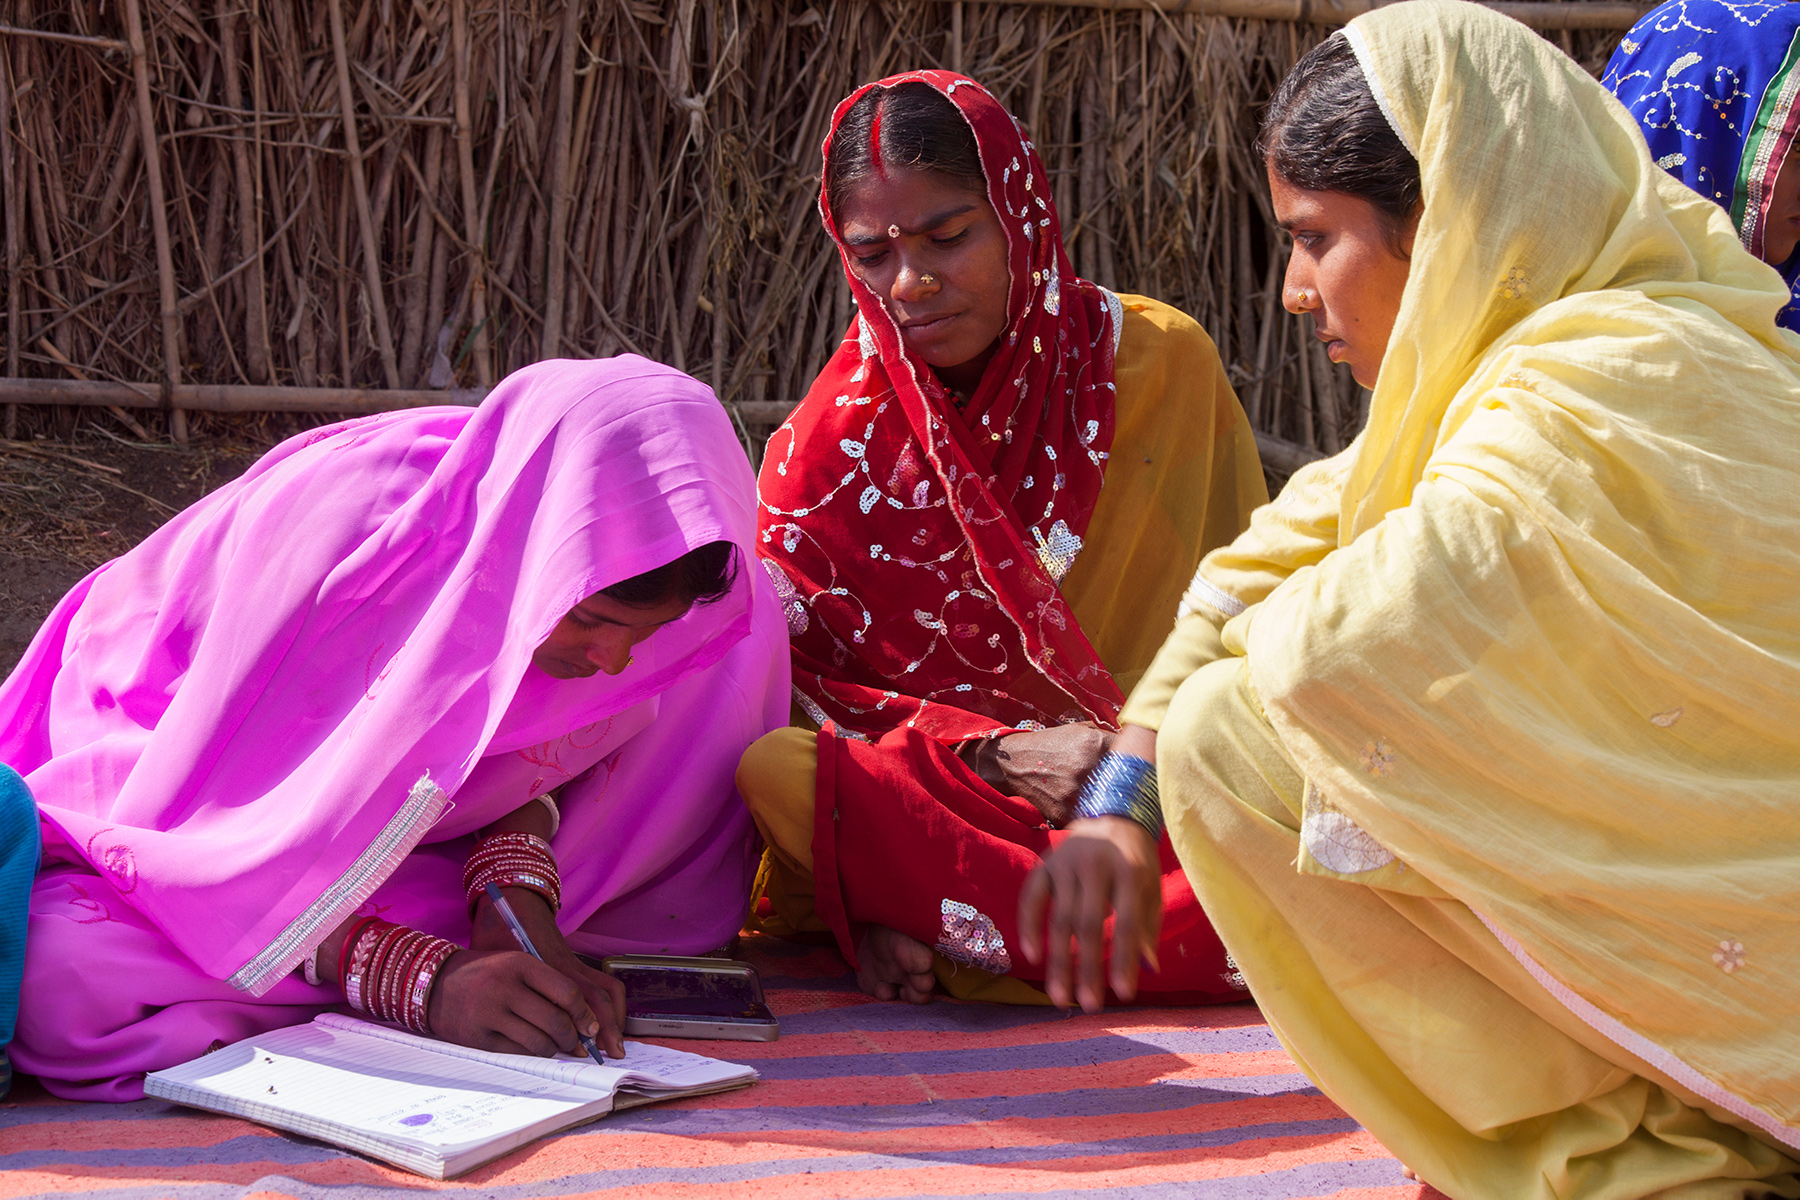 In India, SEWA Bharat creates opportunities for women to come together through micro-enterprise and collectives.